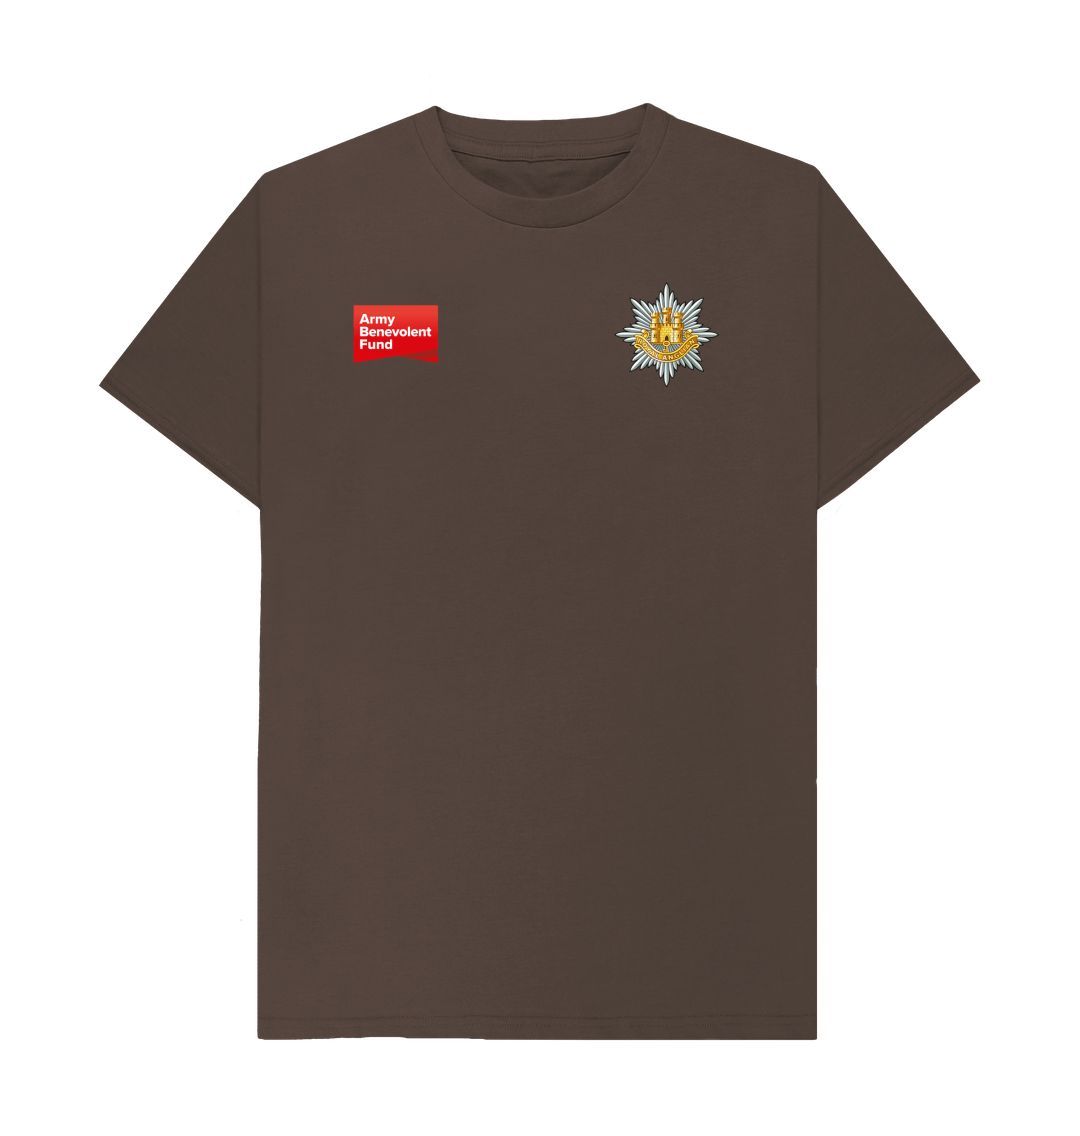 The Royal Anglian Regiment Unisex T-shirt - Army Benevolent Fund